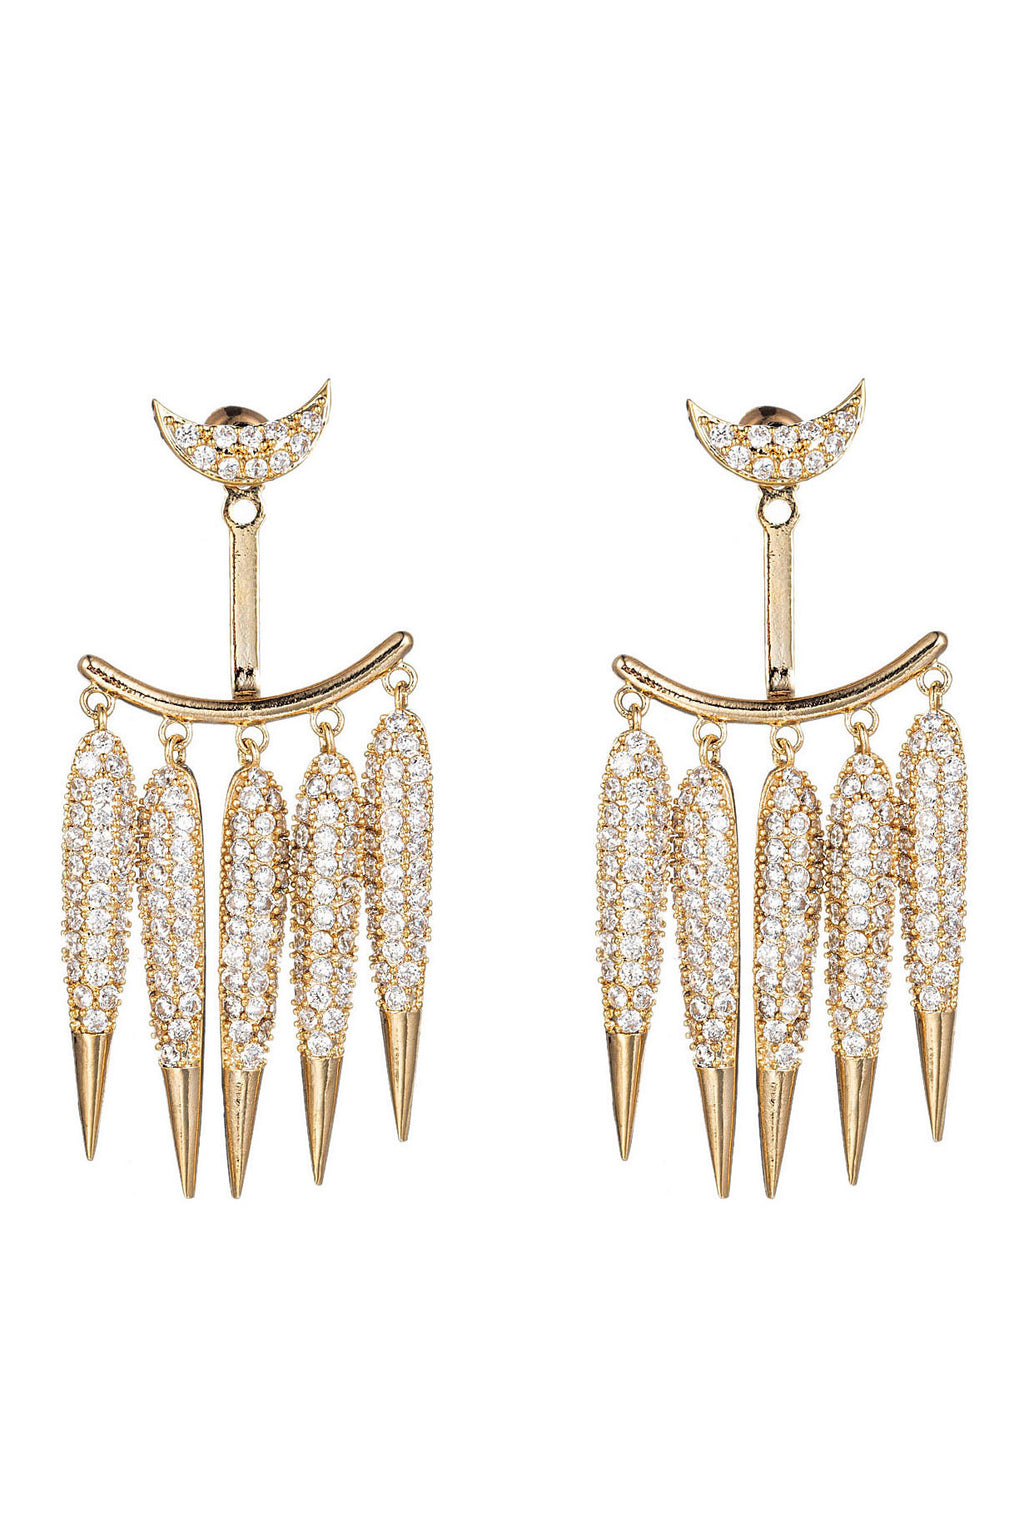 Gold brass moon spike drop earrings studded with CZ crystals.